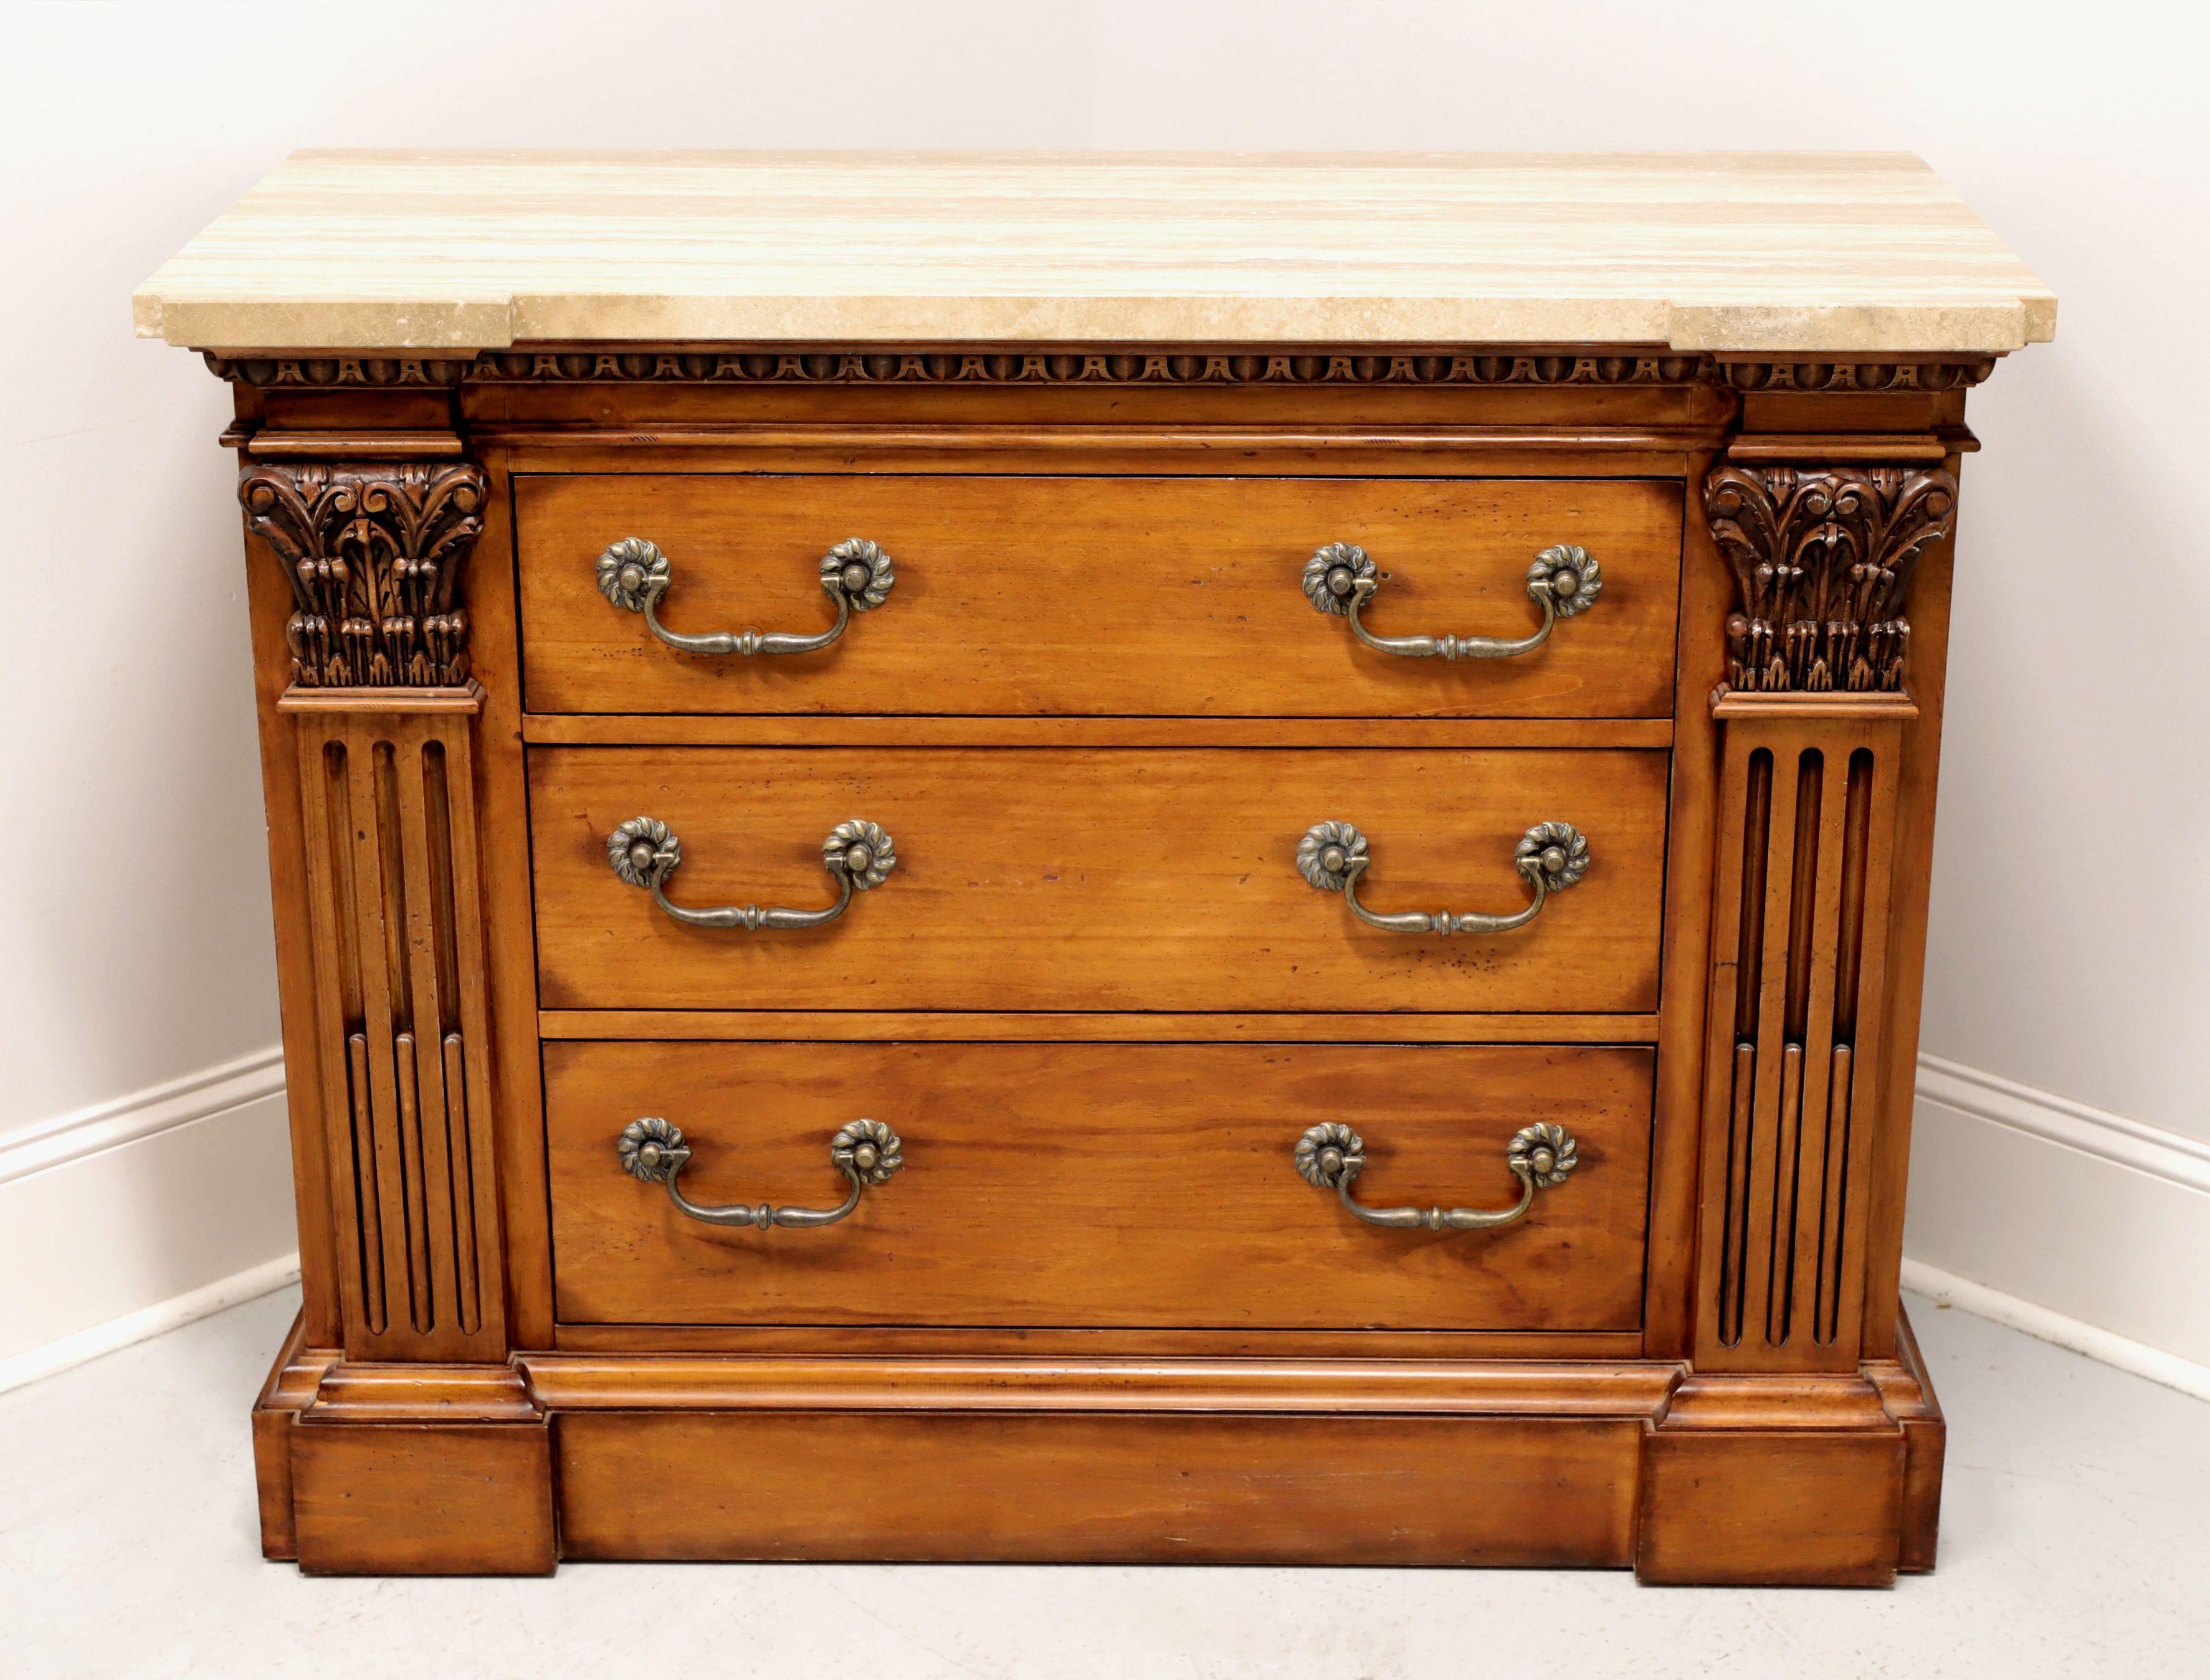 A Neoclassical style bachelor chest by Hickory White. Solid hardwood with their Cotsworth finish, brass hardware, marble top and carved decorative Corinthian columns to the front corners. Features three drawers of dovetail construction. Made in the